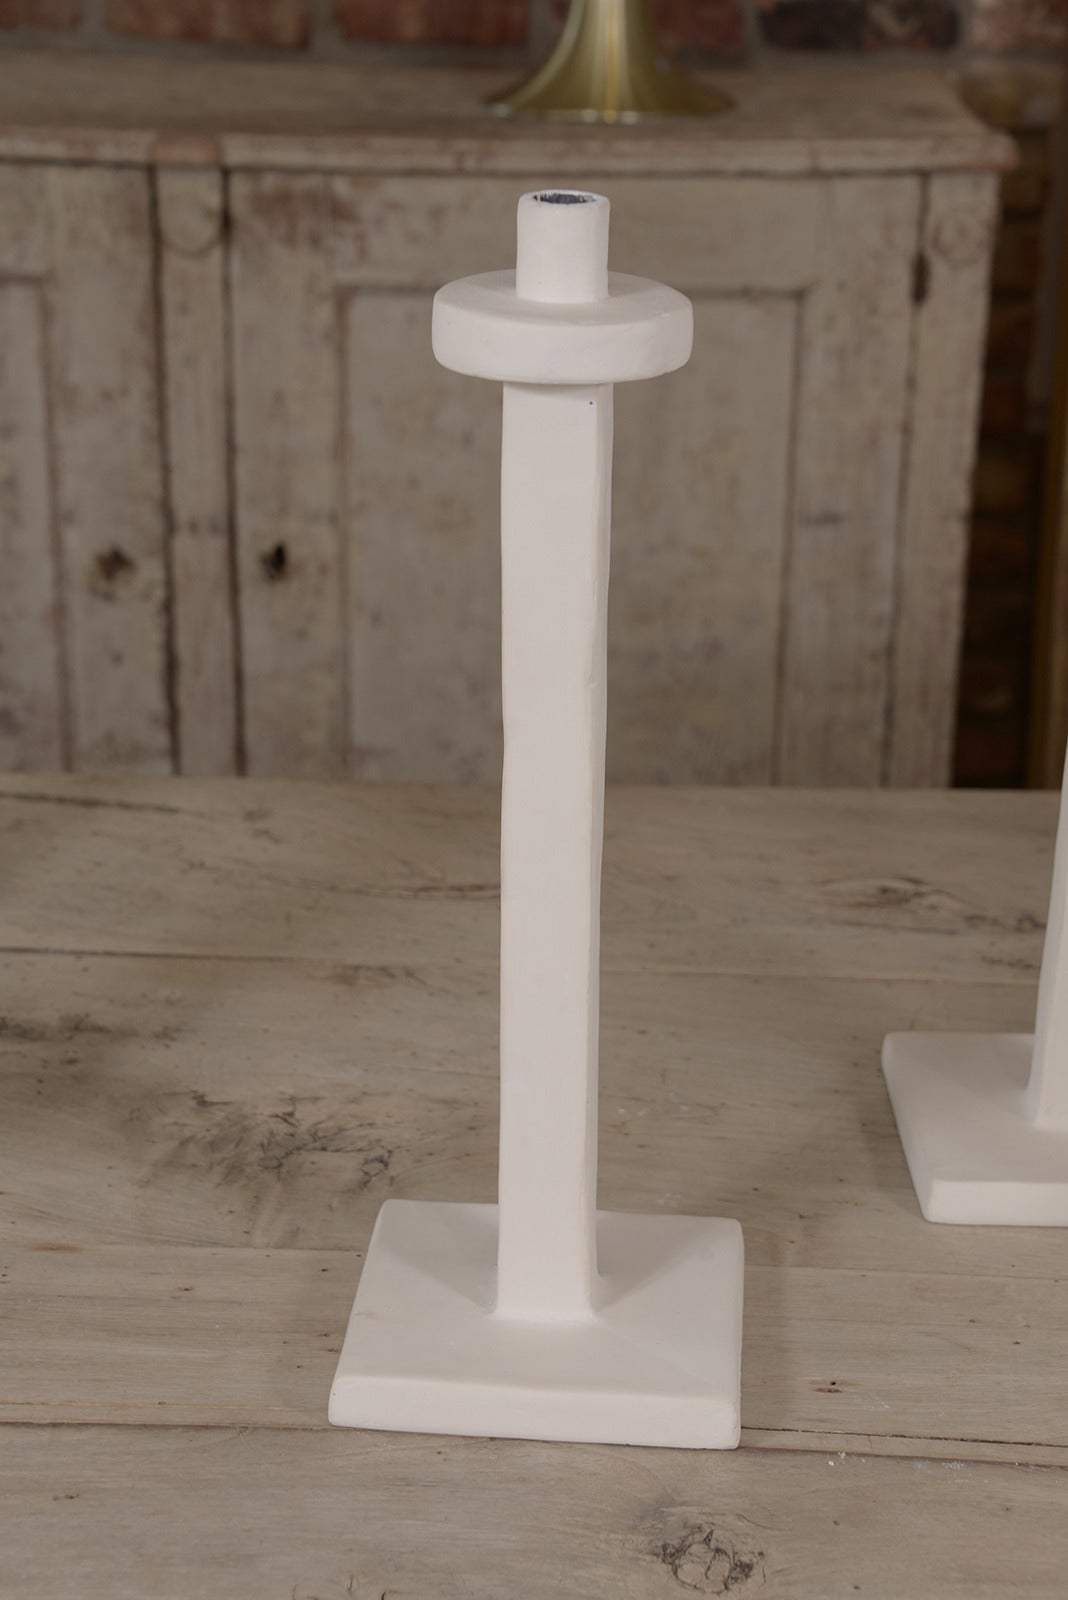 Decorative plaster candlesticks made in France, a variety of sizes available. There are four 18 inches tall and five 23 inches tall.